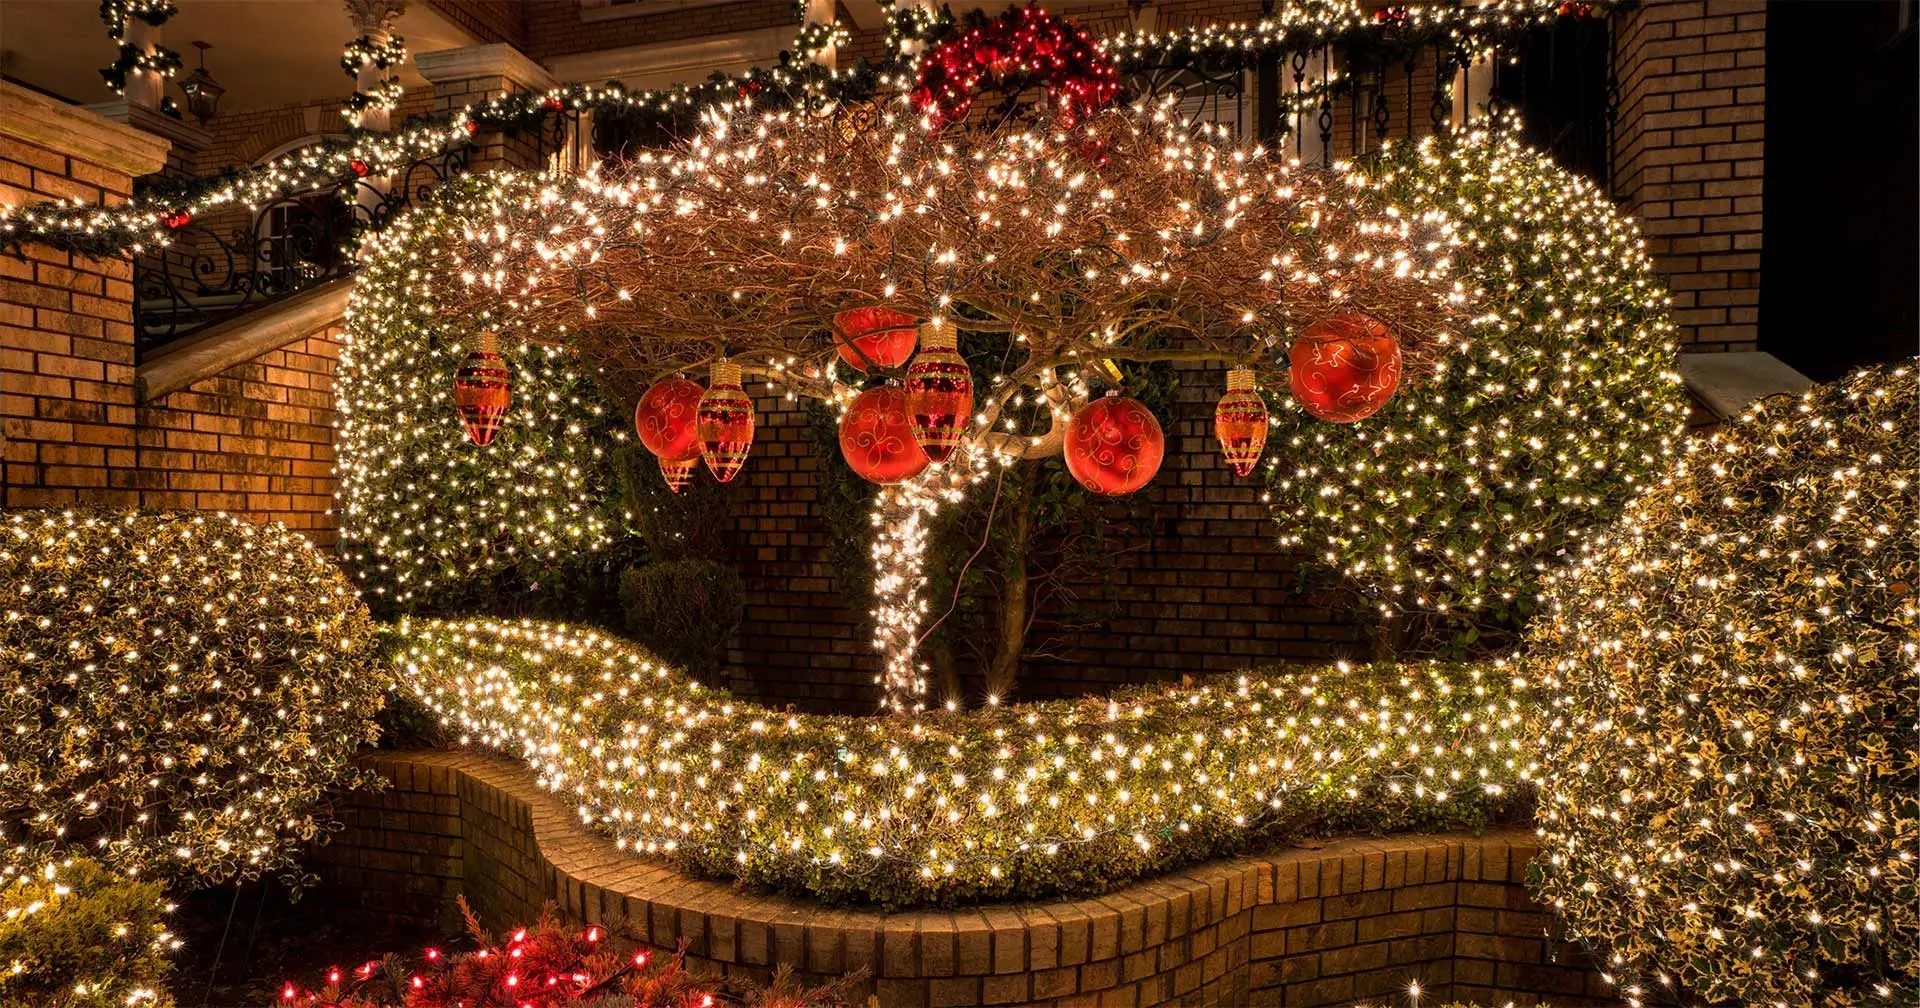 Elaborate holiday lighting installation at a home in Keller, TX.